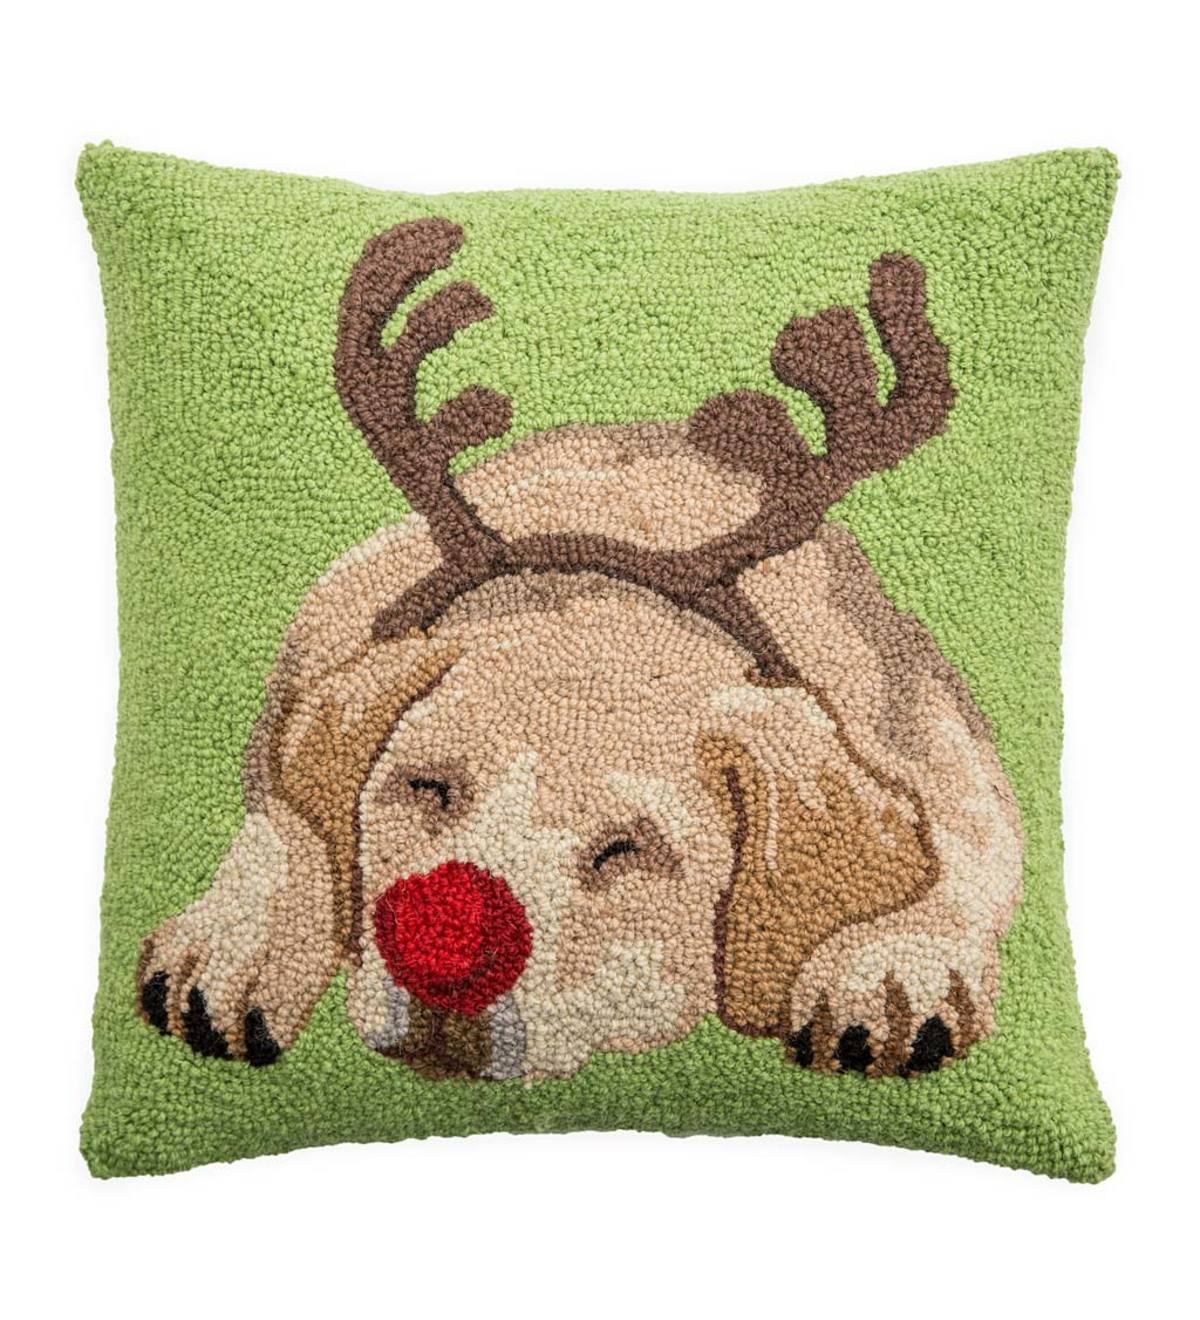 Yellow Labrador Pillow Cover Yellow Lab Gift Labrador Retriever Cushion  Labrador Gift Idea Labrador Retriever Pillow Red Cardinals Red Birds 